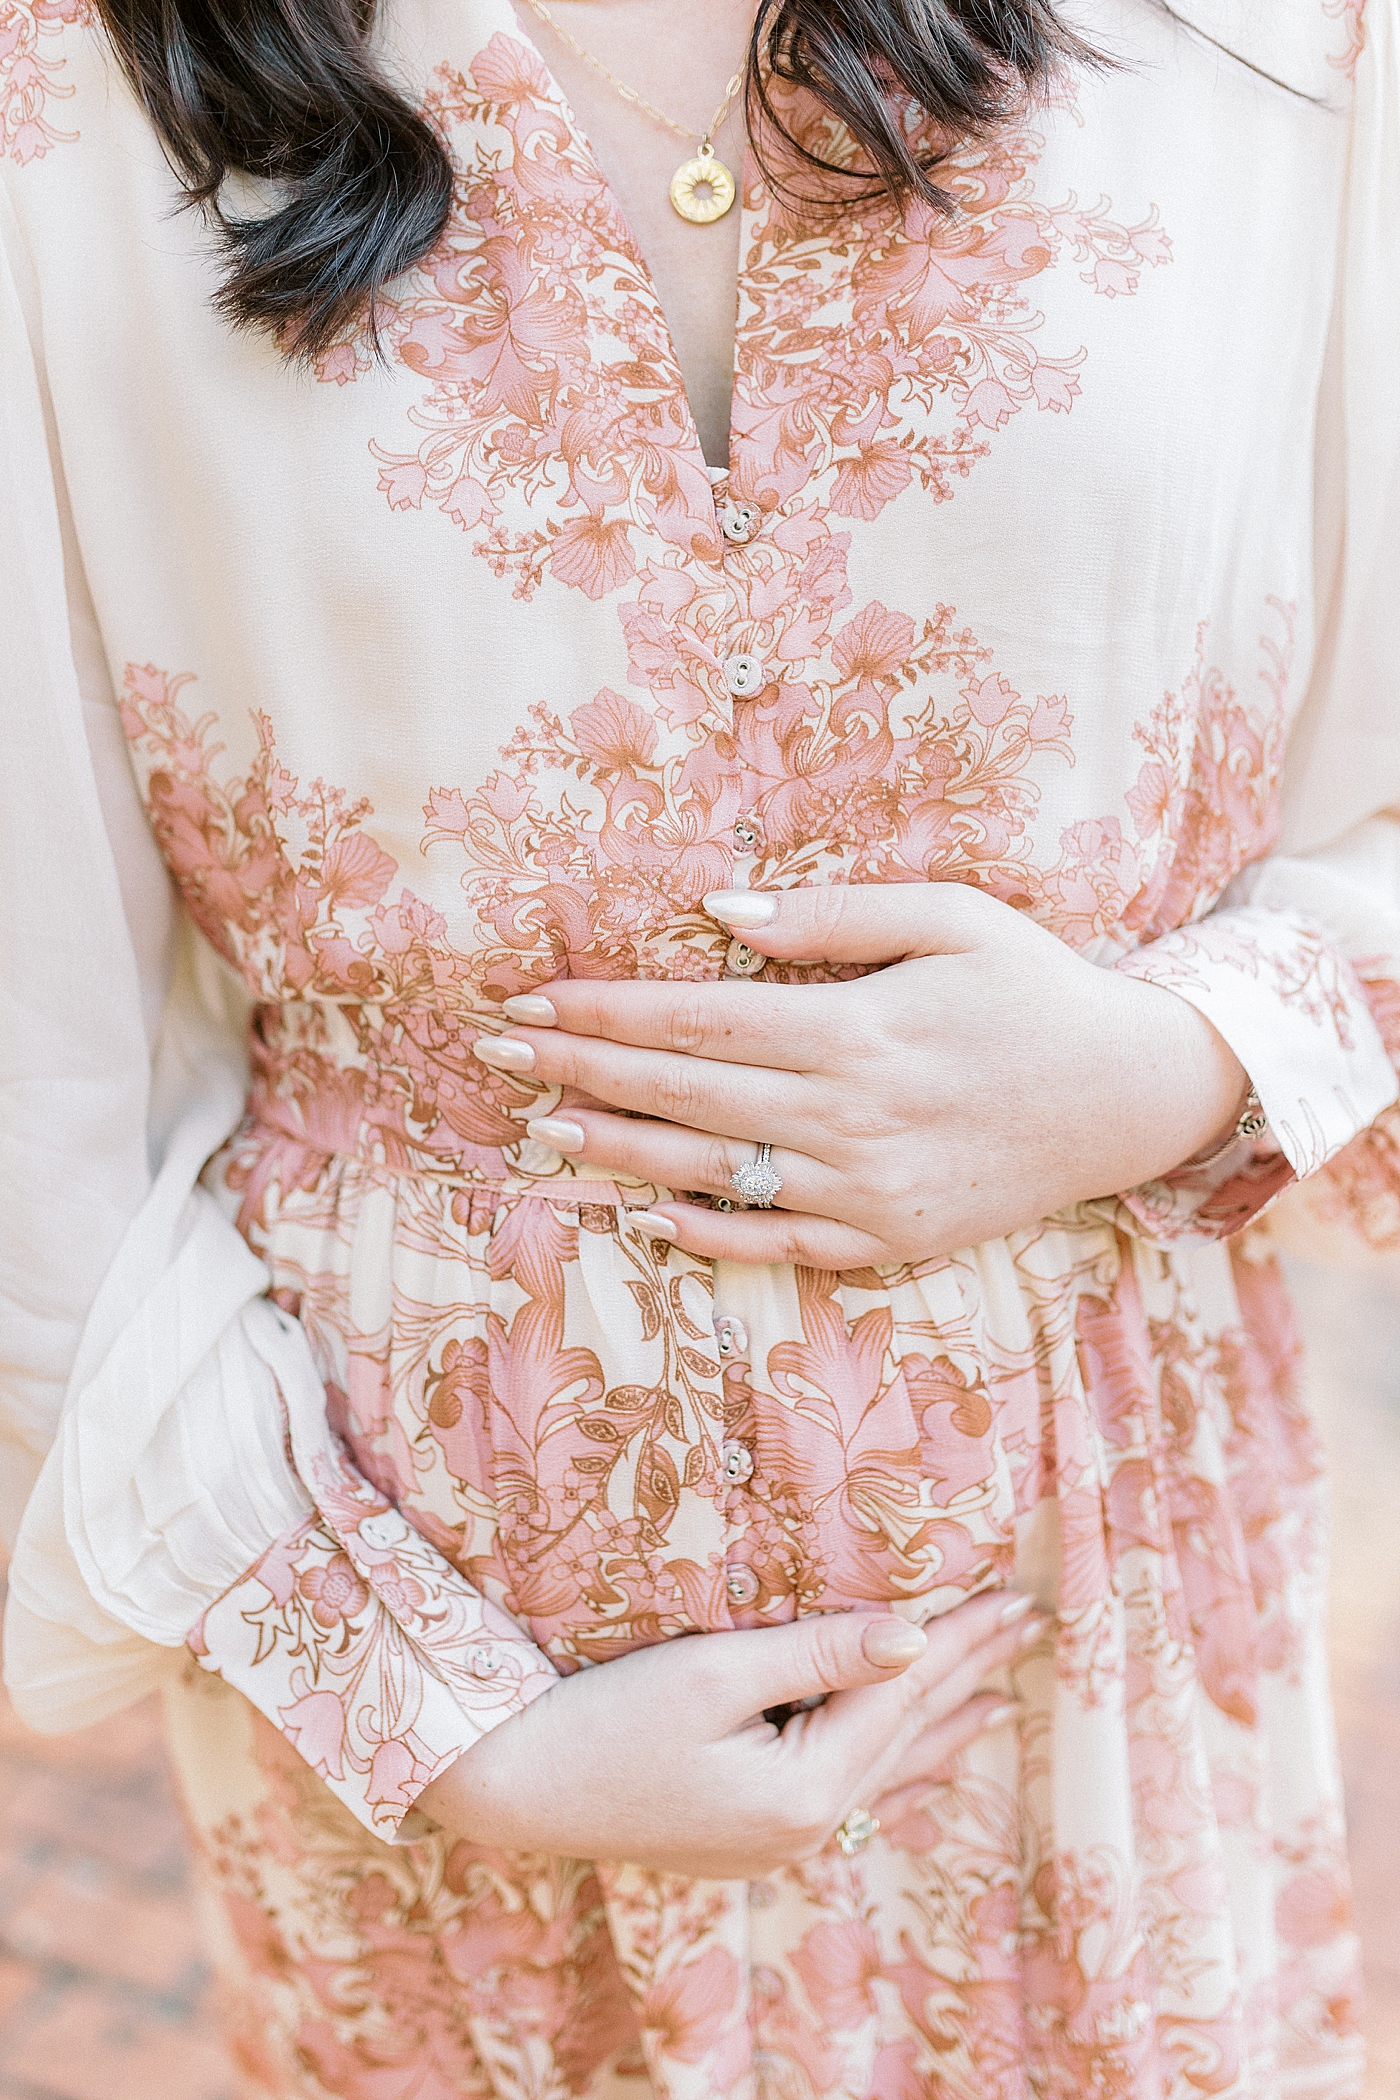 Mother to be in pink floral dress cradling her belly | Photo by Caitlyn Motycka Photography